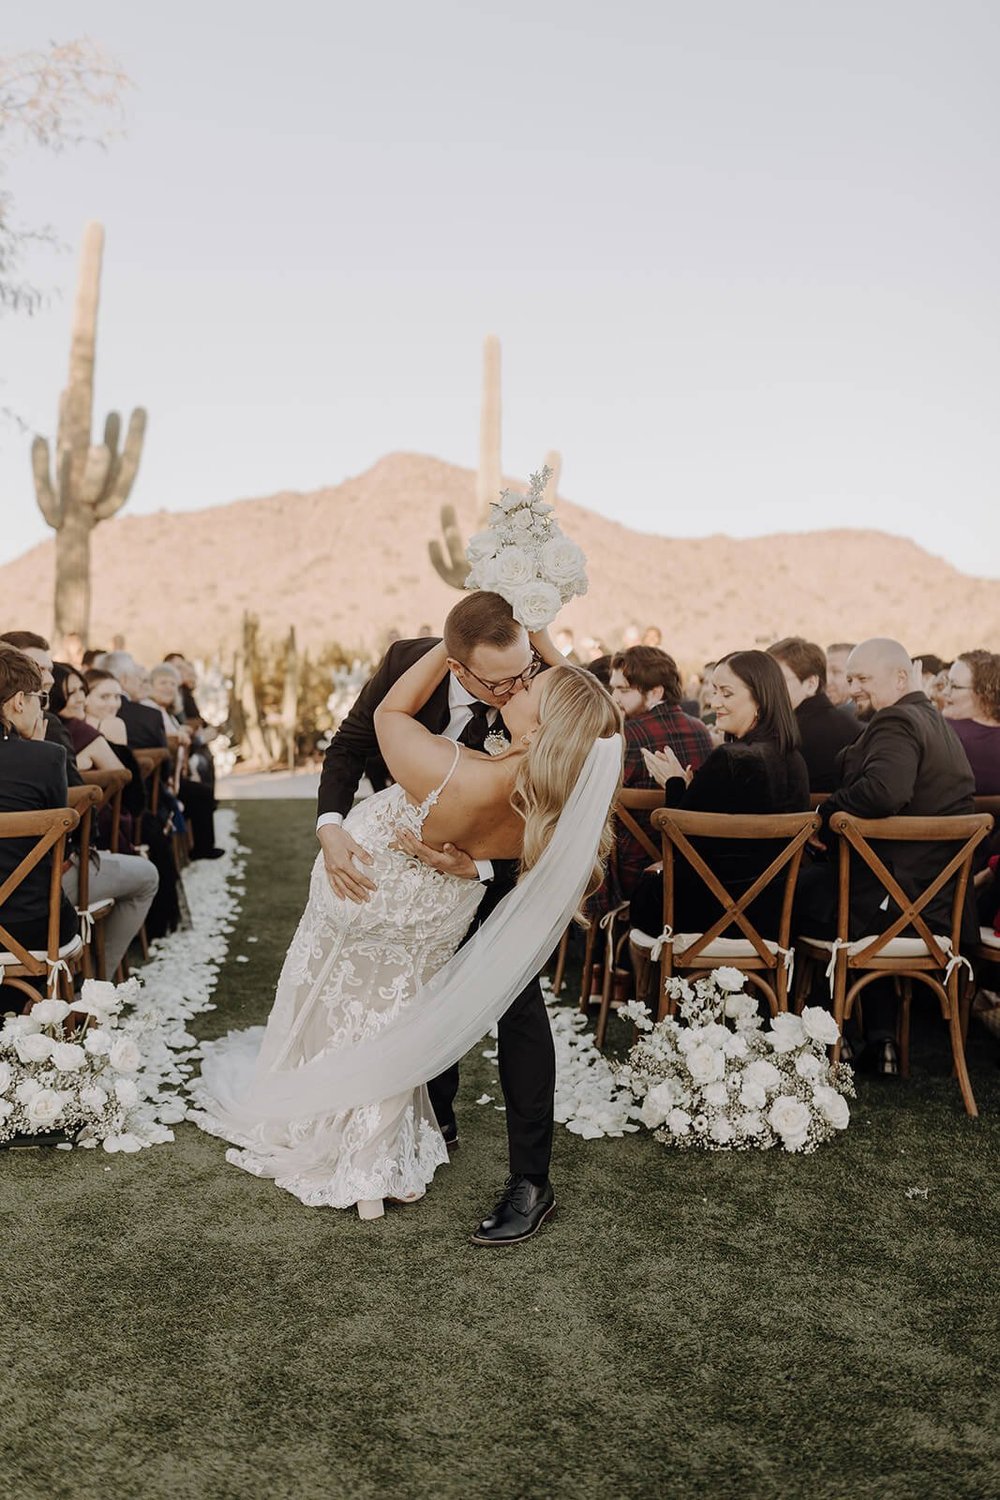 Groom dips bride for a kiss at end of ceremony at Arizona destination wedding